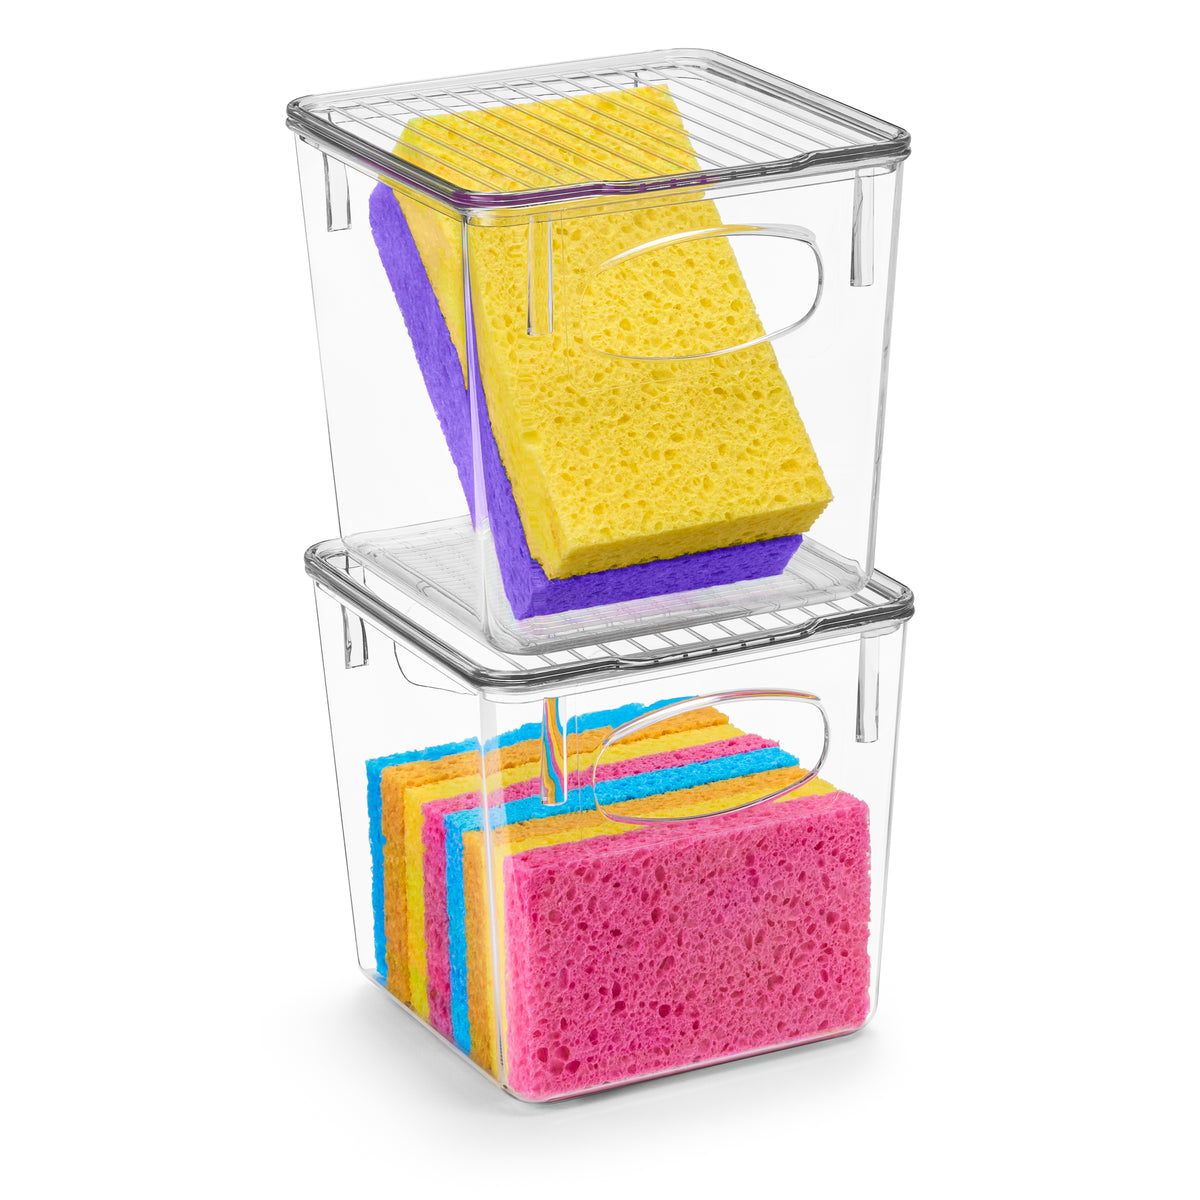 Clear Plastic Bins w/ Lids for Cleaning Supplies (Small)